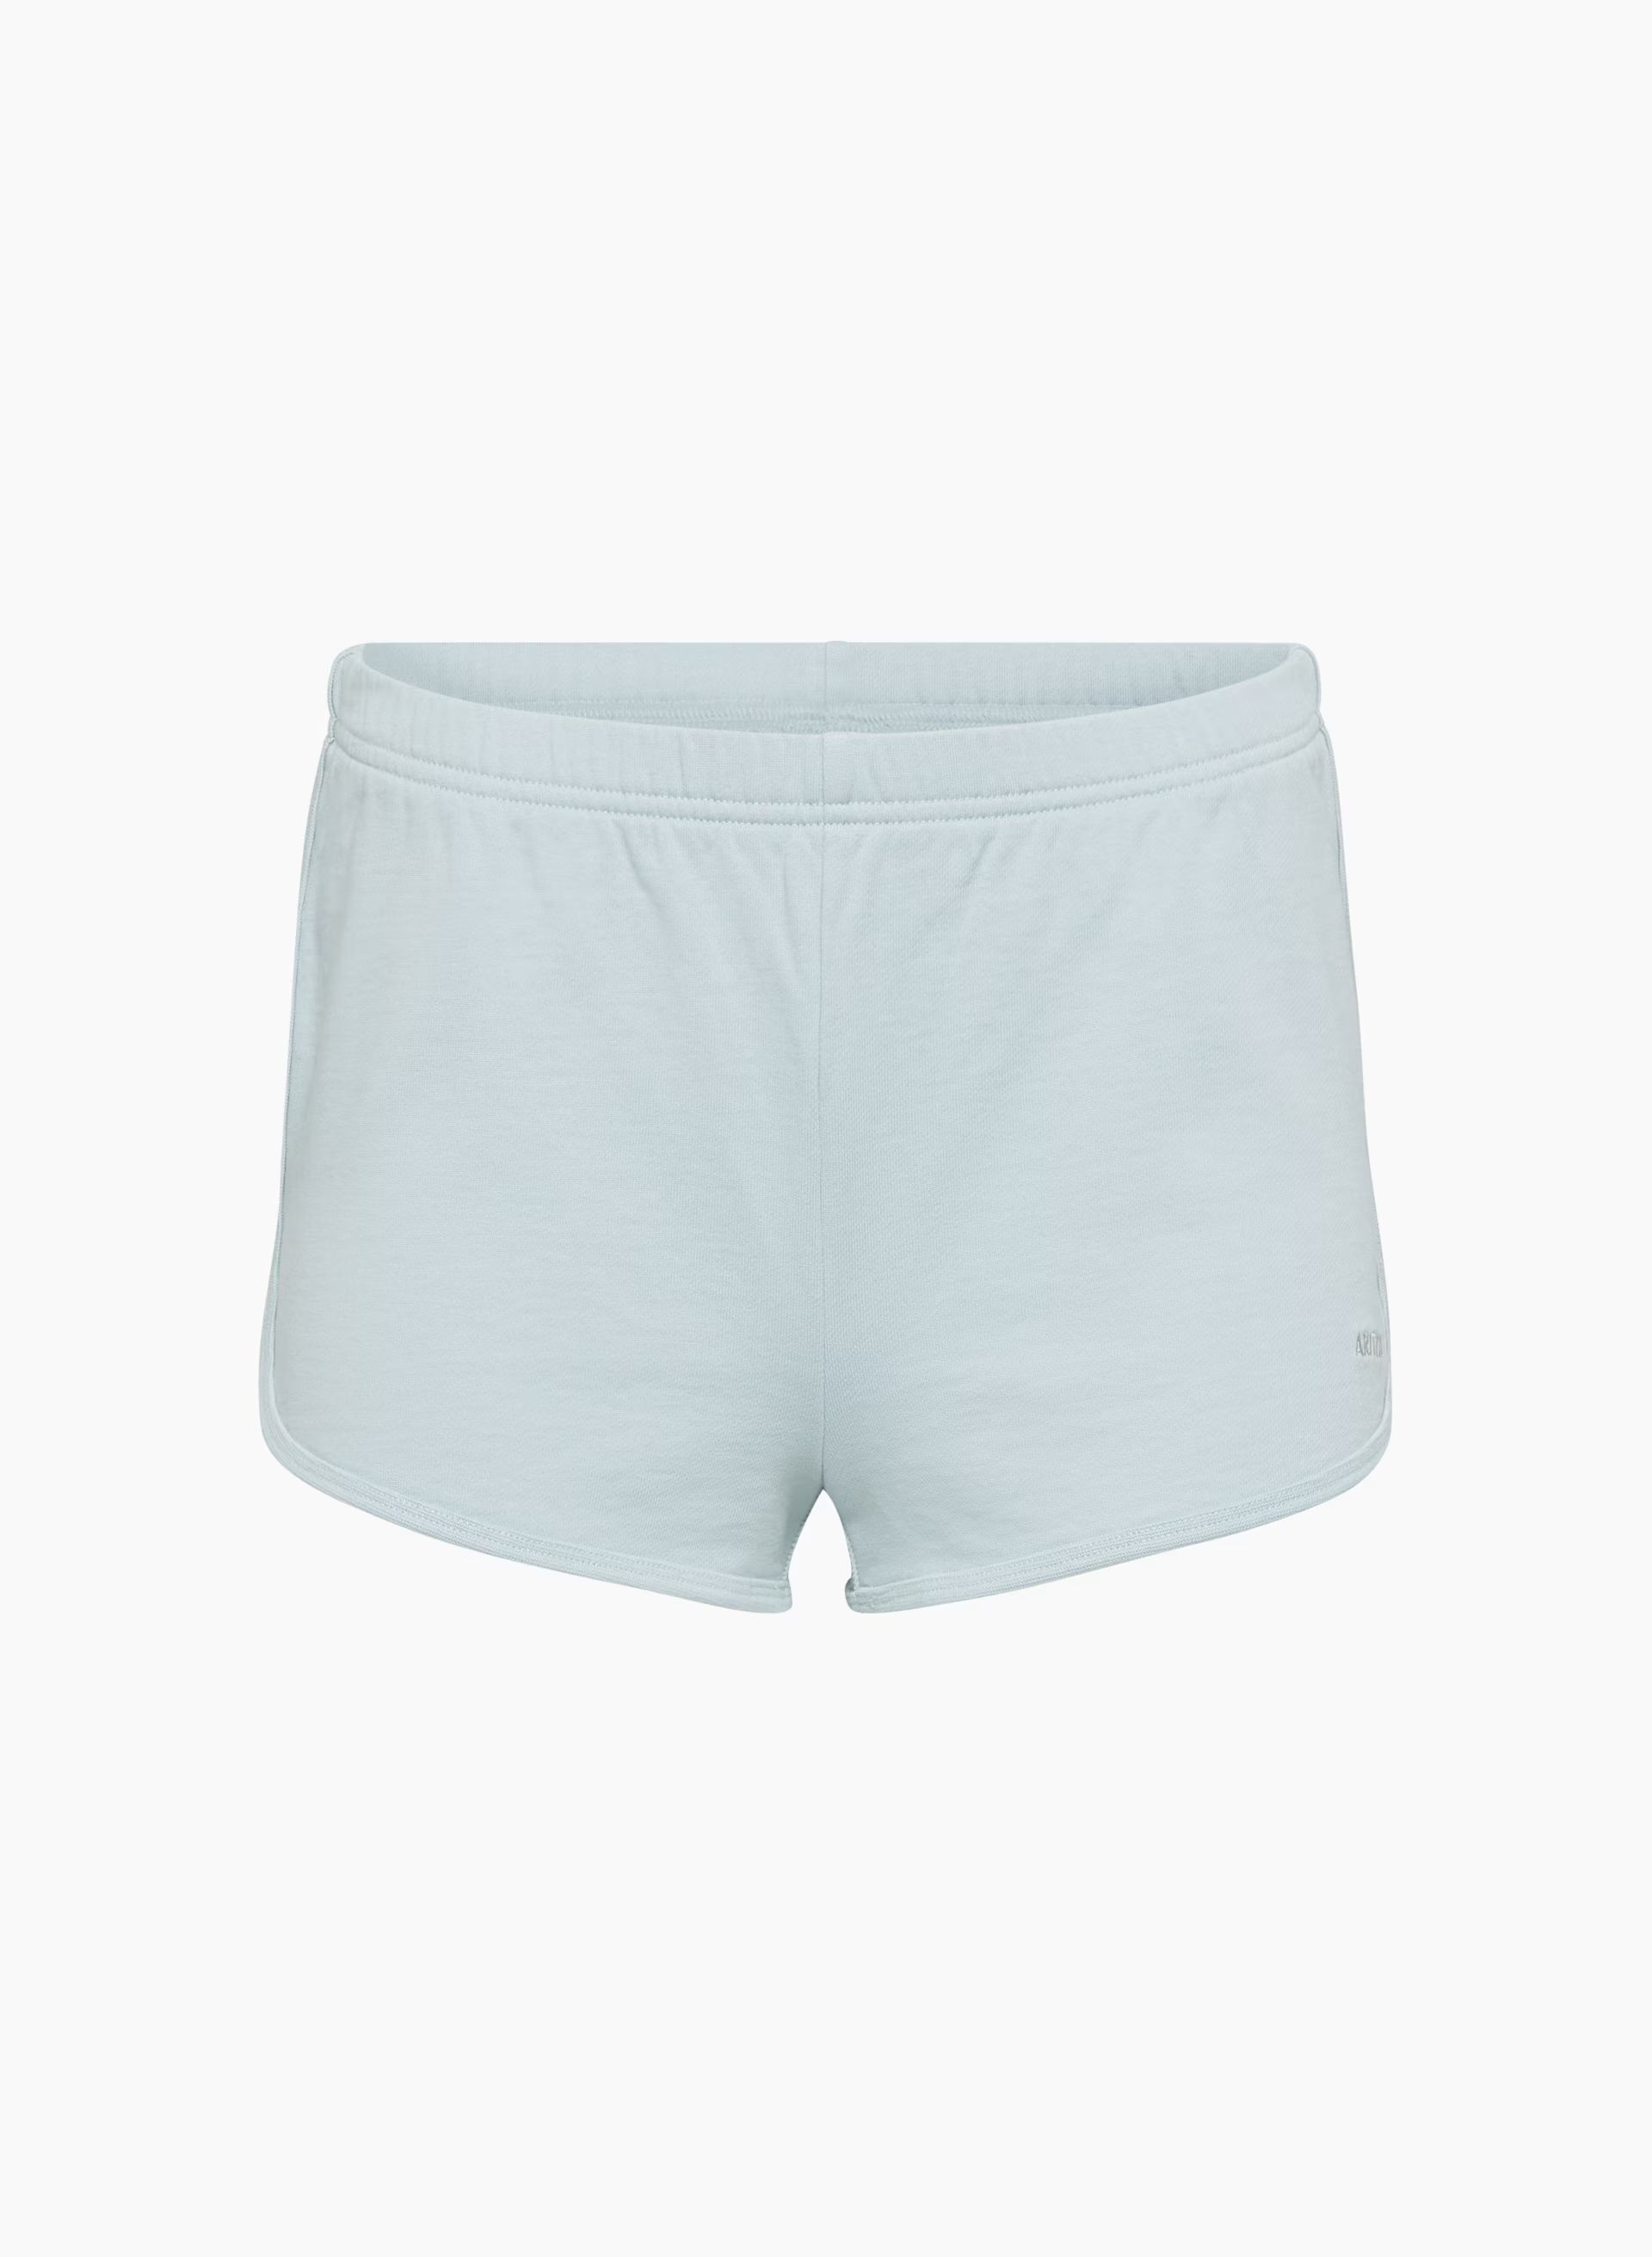 AIRY TERRY PERFECT DOLPHIN MICRO SHORT | Aritzia